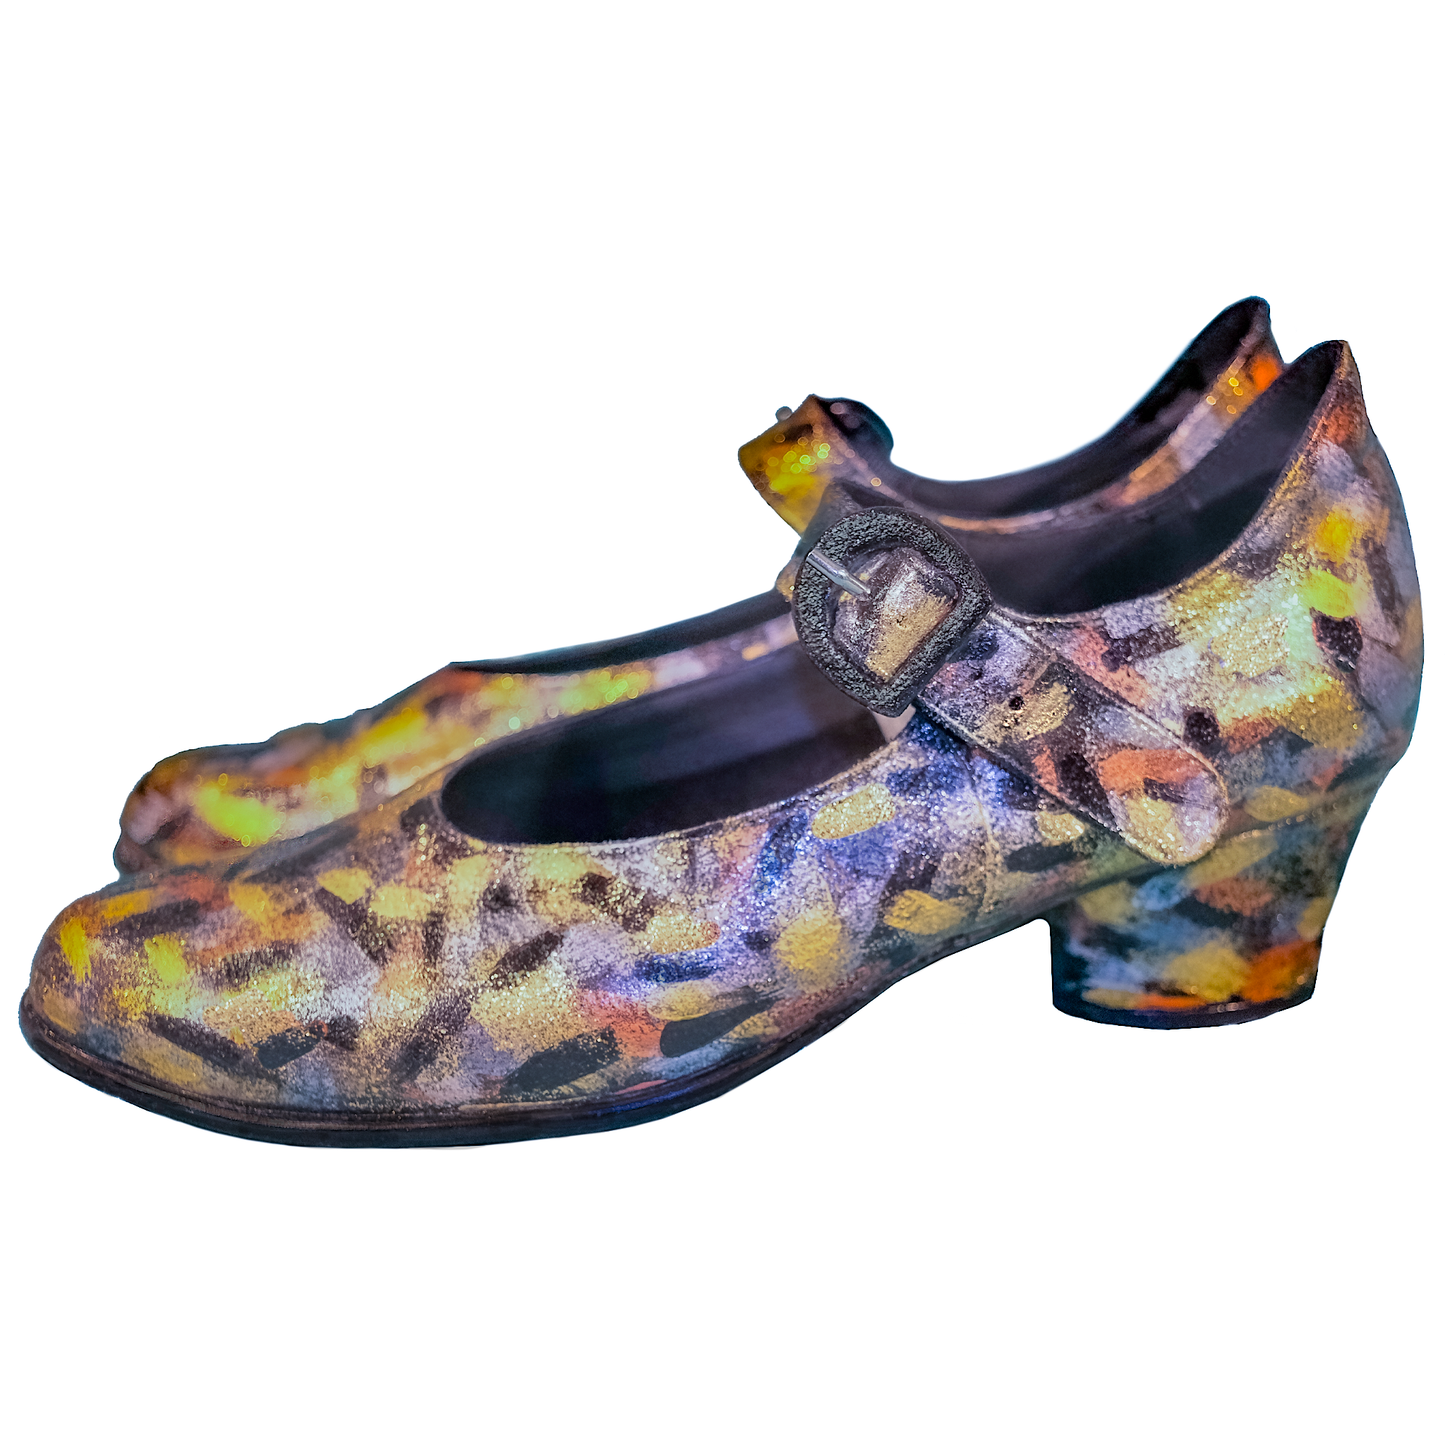 Metallic Sparkle Up-cycled Arche Mary Jane Shoes - Size 9 - Hand-painted by Skye De La Rosa